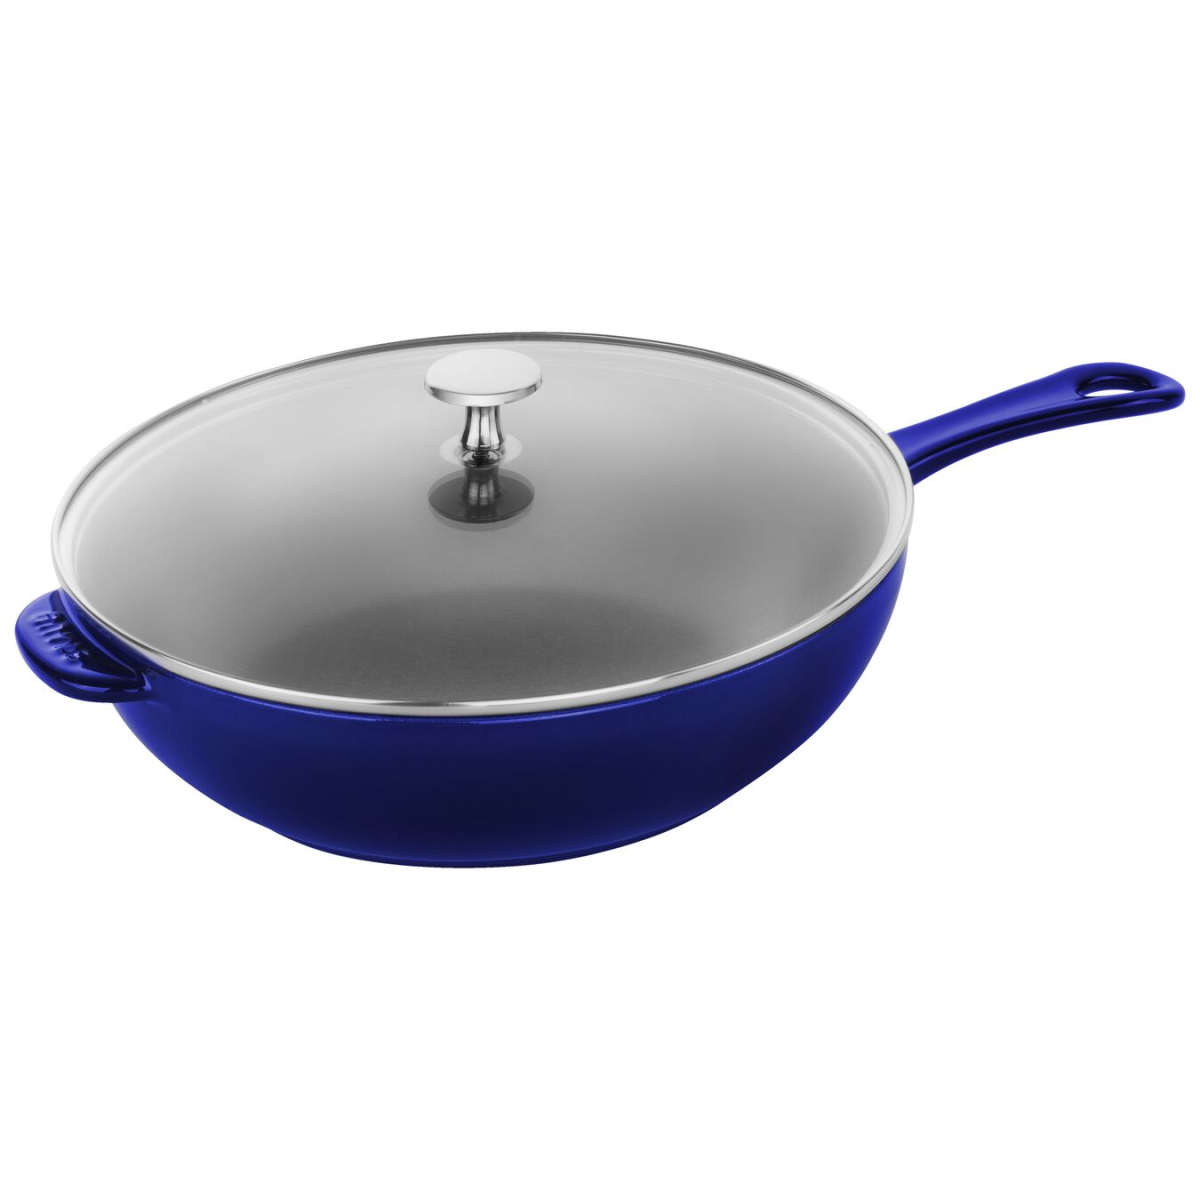 https://www.berings.com/wp-content/uploads/2023/05/Staub-Cast-Iron-10-inch-Daily-Pan-with-Glass-Lid-Dark-Blue.jpg